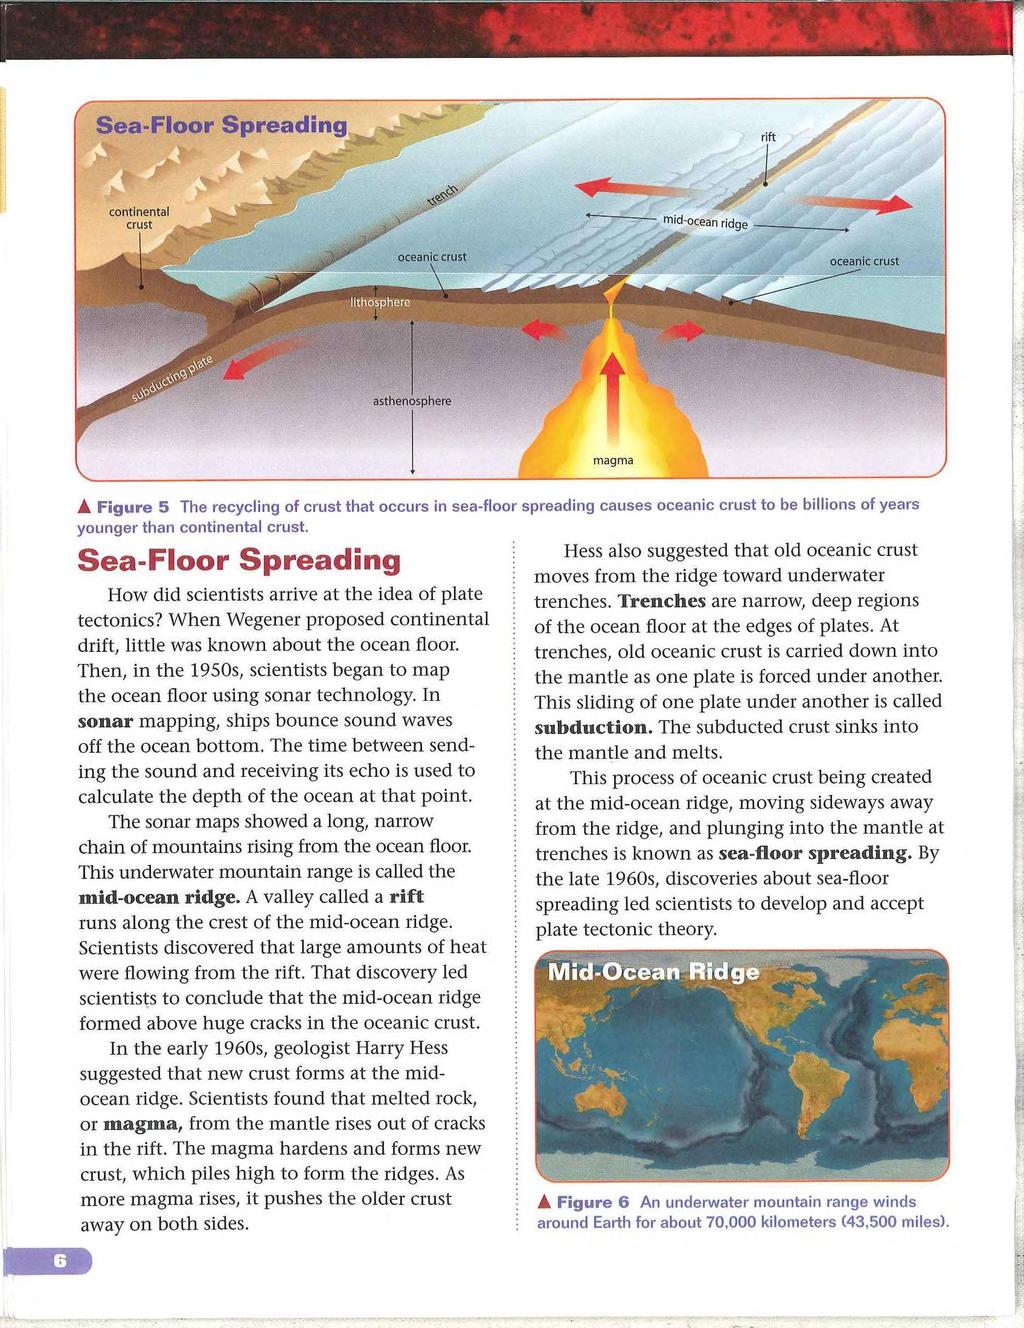 Figure 5 The recycling of crust that occurs in sea-floor spreading causes oceanic crust to be billions of years younger than continental crust.